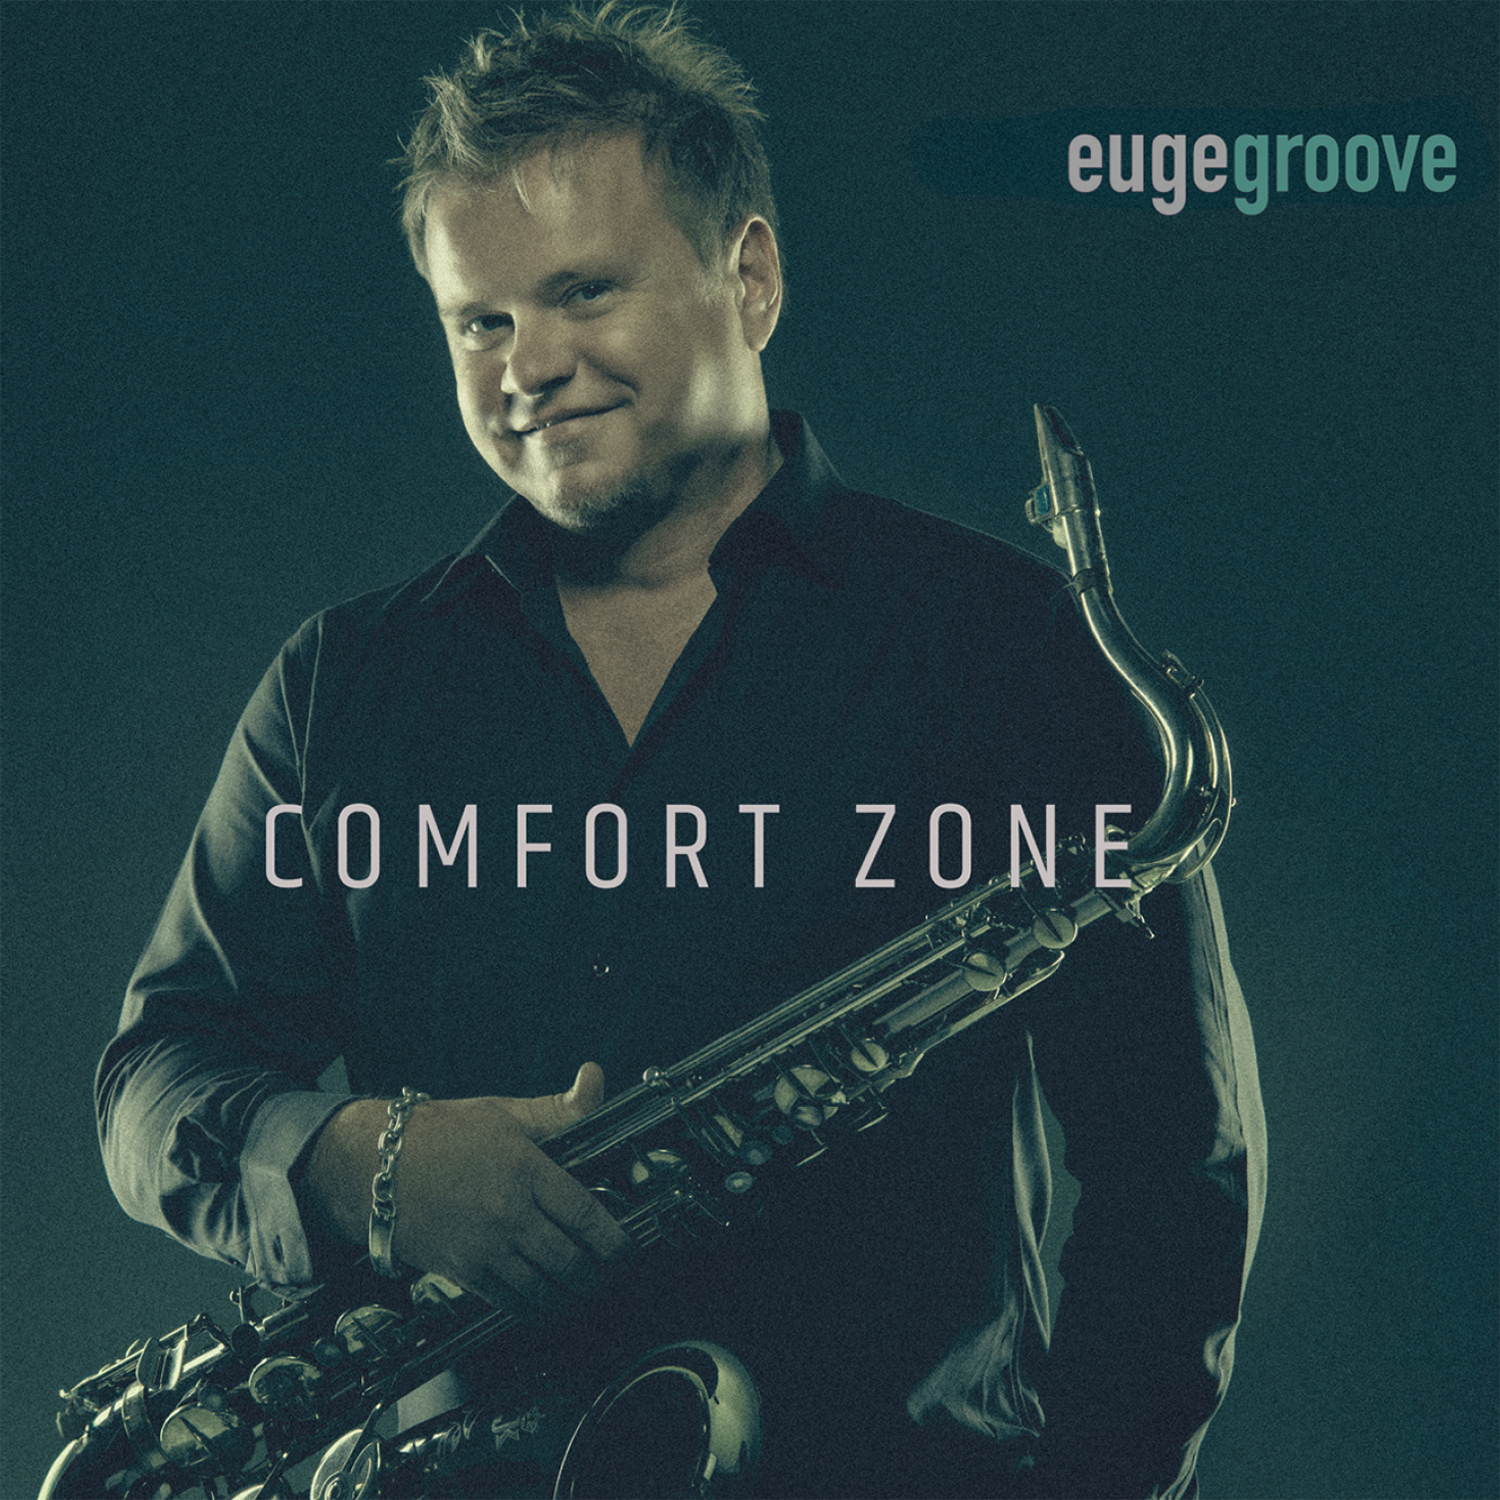 Art for Comfort Zone by Euge Groove